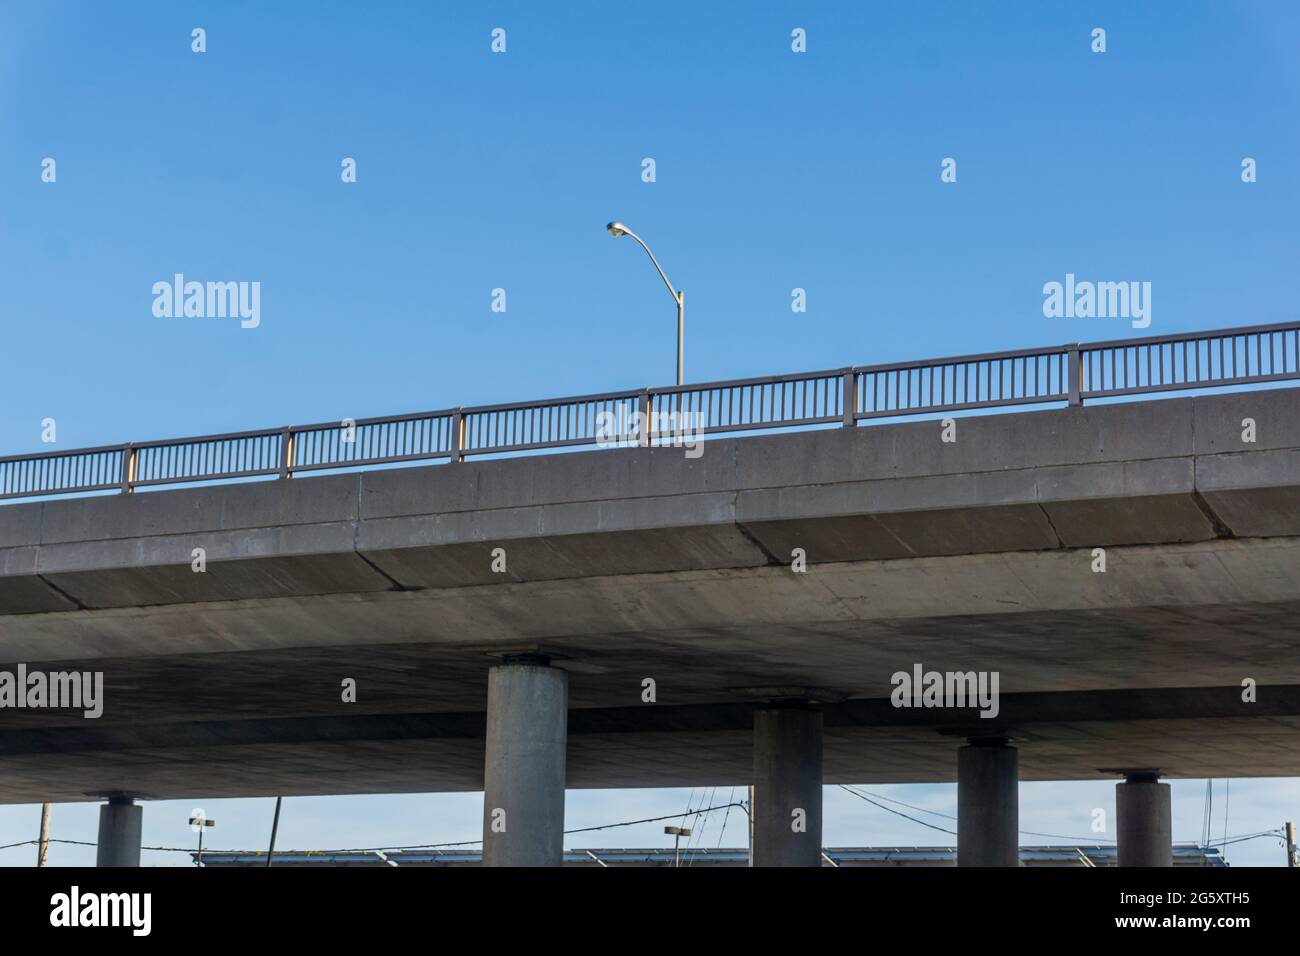 View from below of a flyover road suspended on concrete pillars Stock Photo